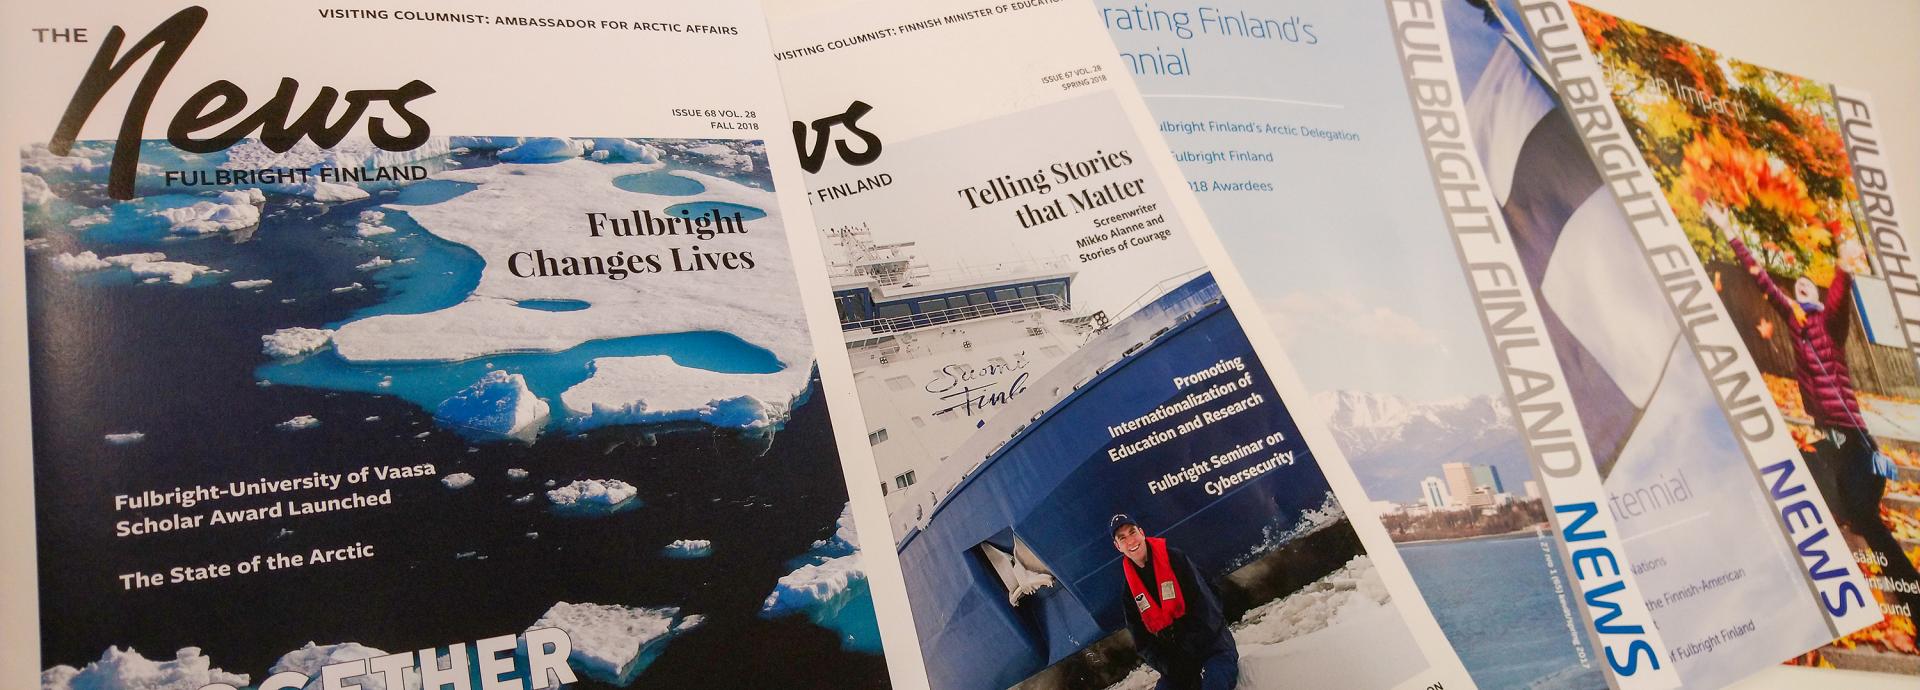 Selection of Fulbright Finland News magazine covers on a table